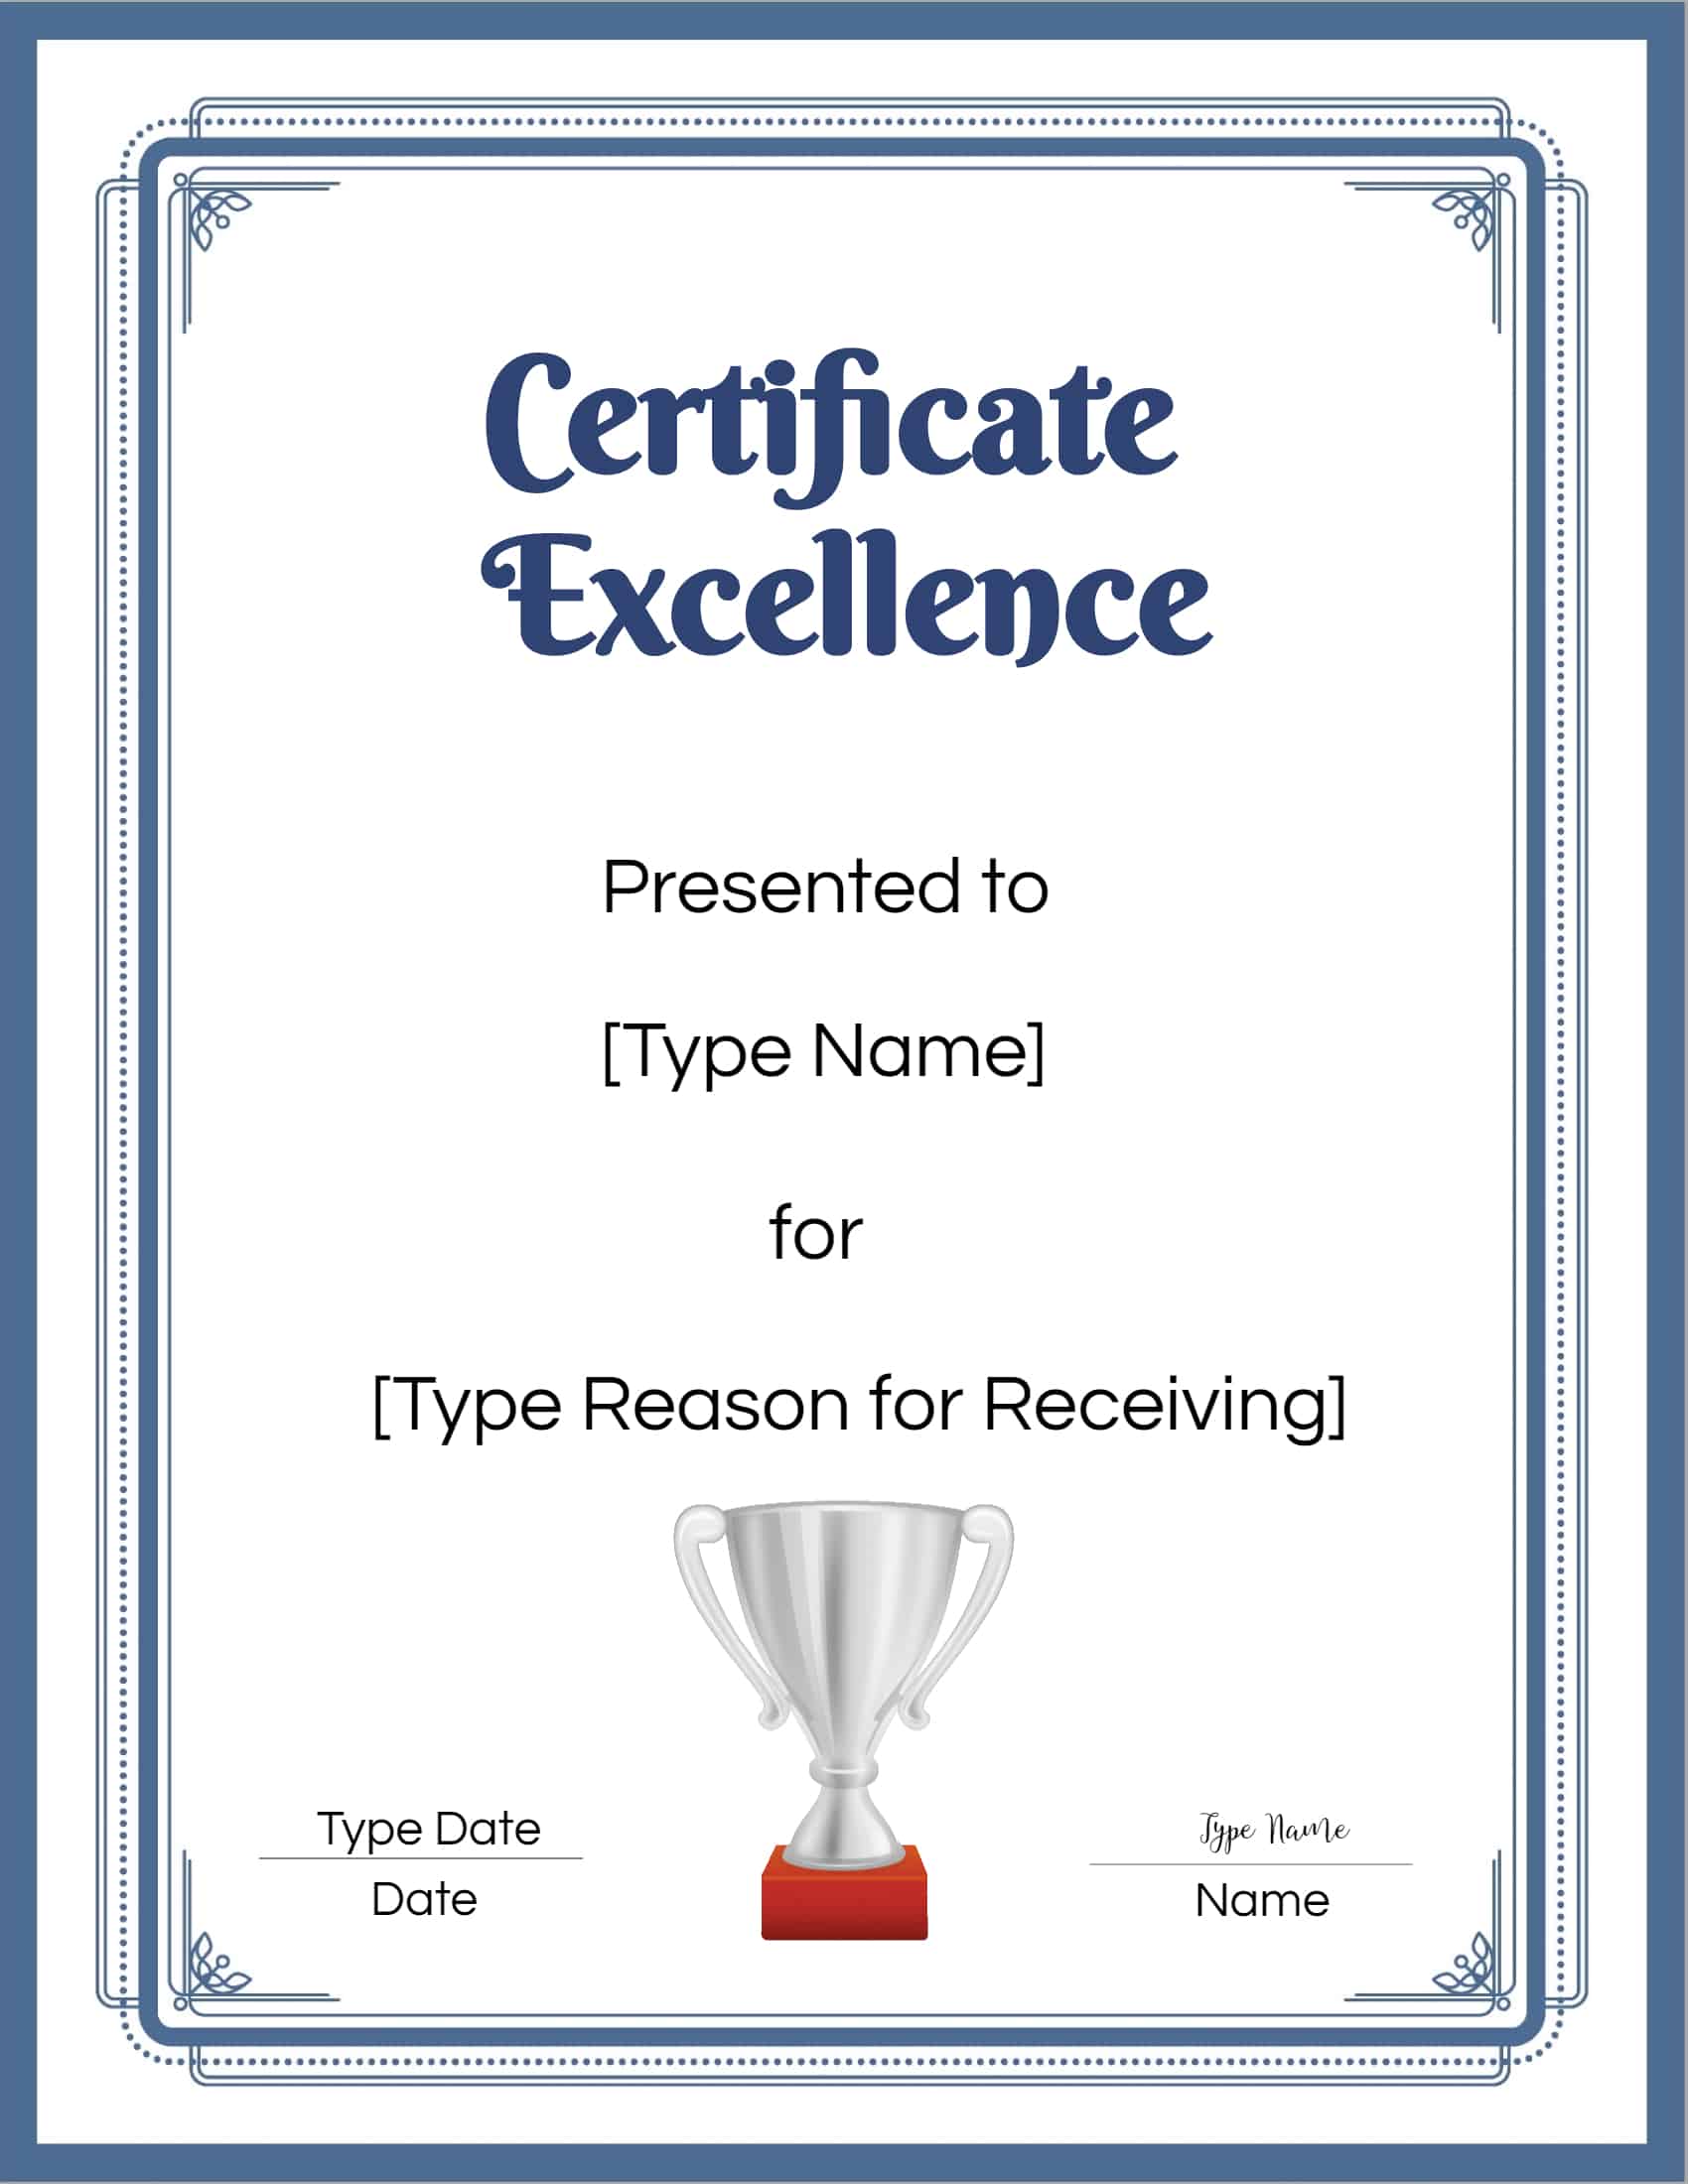 FREE Certificate of Excellence Editable and Printable